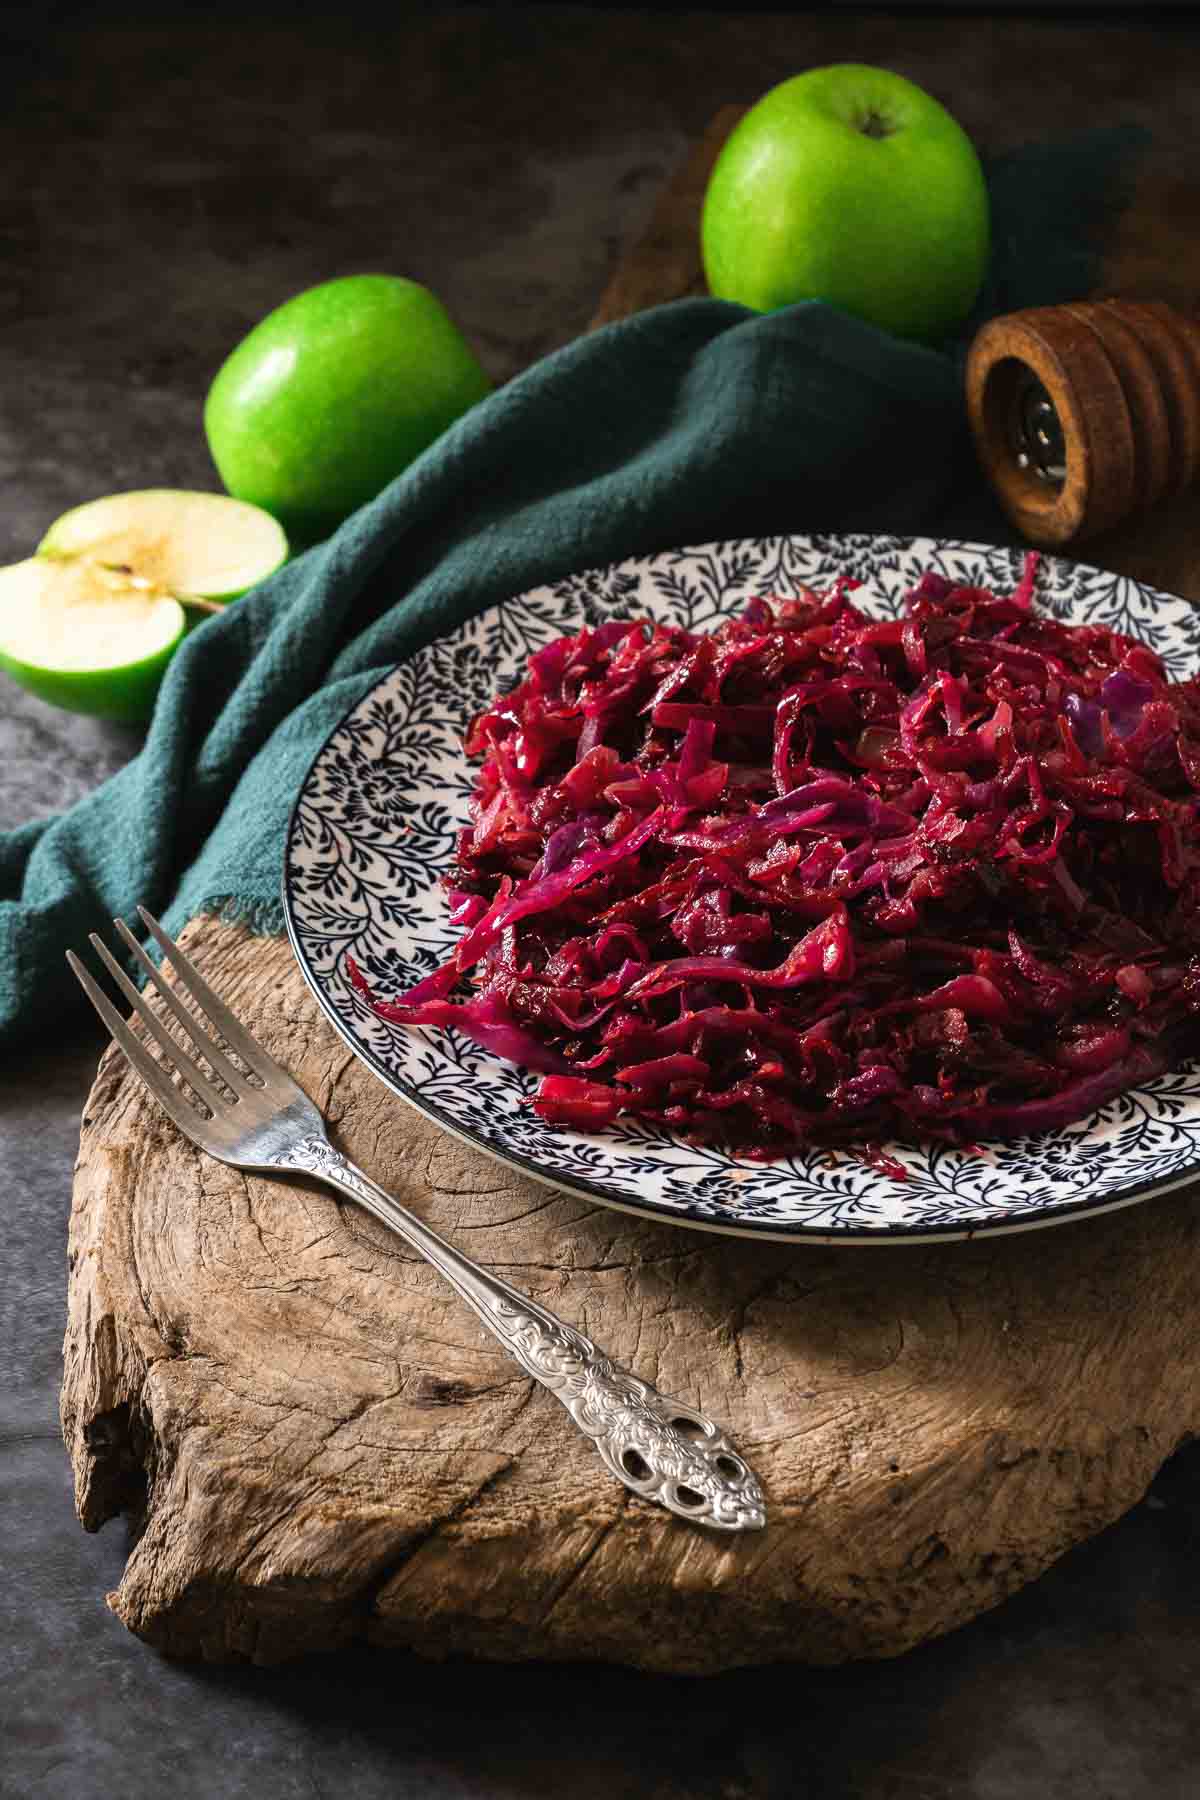 A large plate full of shredded and braised red cabbage or rotkohl.